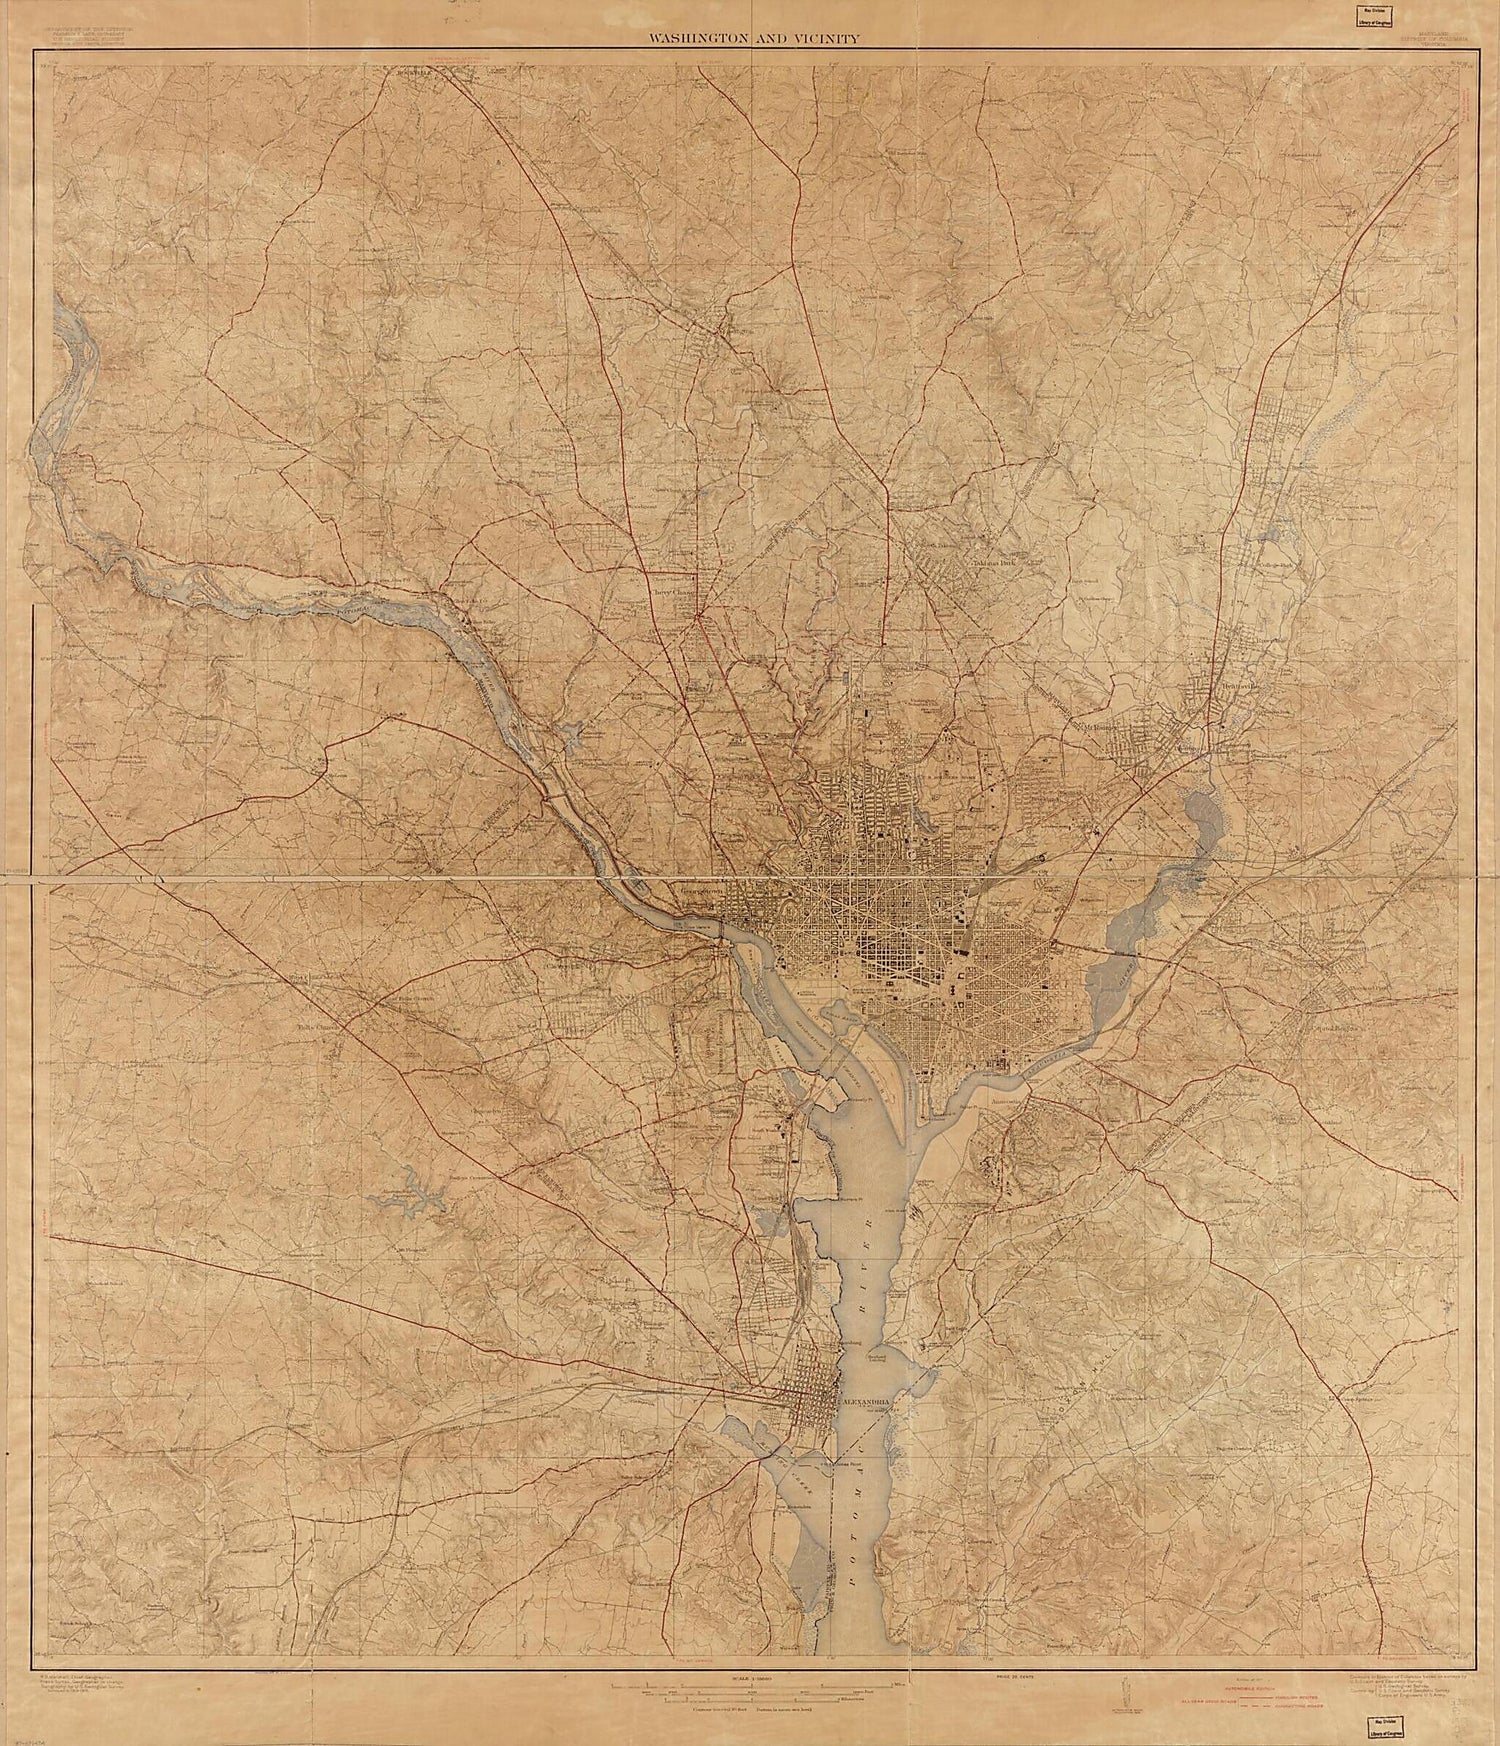 This old map of Washington and Vicinity, Maryland, District of Columbia, Virginia from 1917 was created by  Geological Survey (U.S.), R. B. (Robert Bradford) Marshall, Frank Sutton in 1917